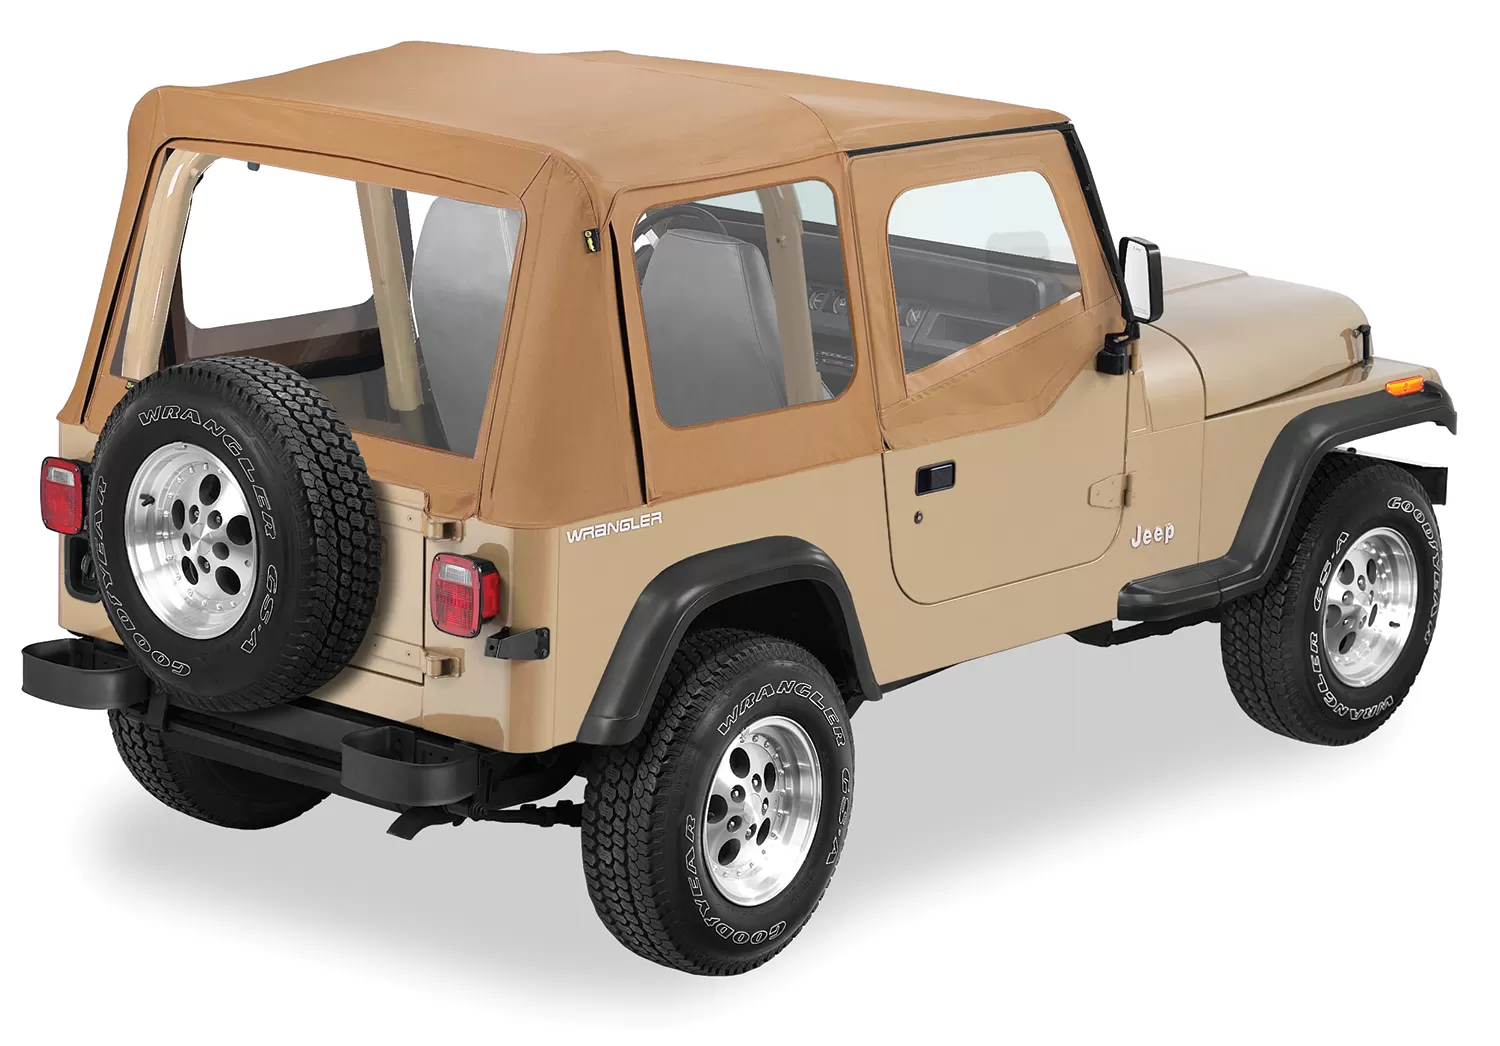 Pavement Ends By Bestop Spice Replay OEM Replacement Soft Top Clear Windows Jeep Wrangler 1988-1995 - 51130-37